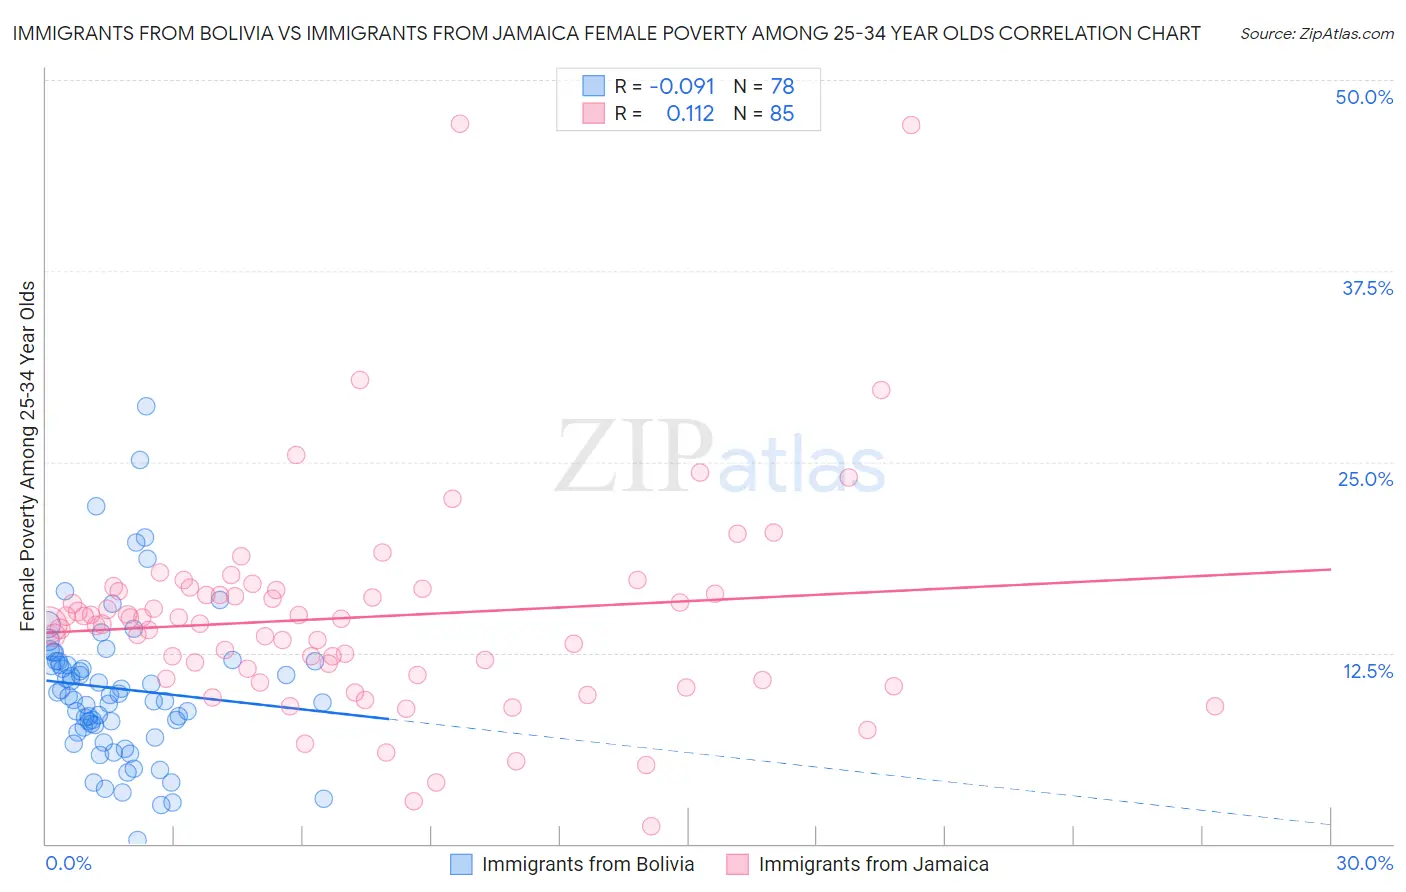 Immigrants from Bolivia vs Immigrants from Jamaica Female Poverty Among 25-34 Year Olds